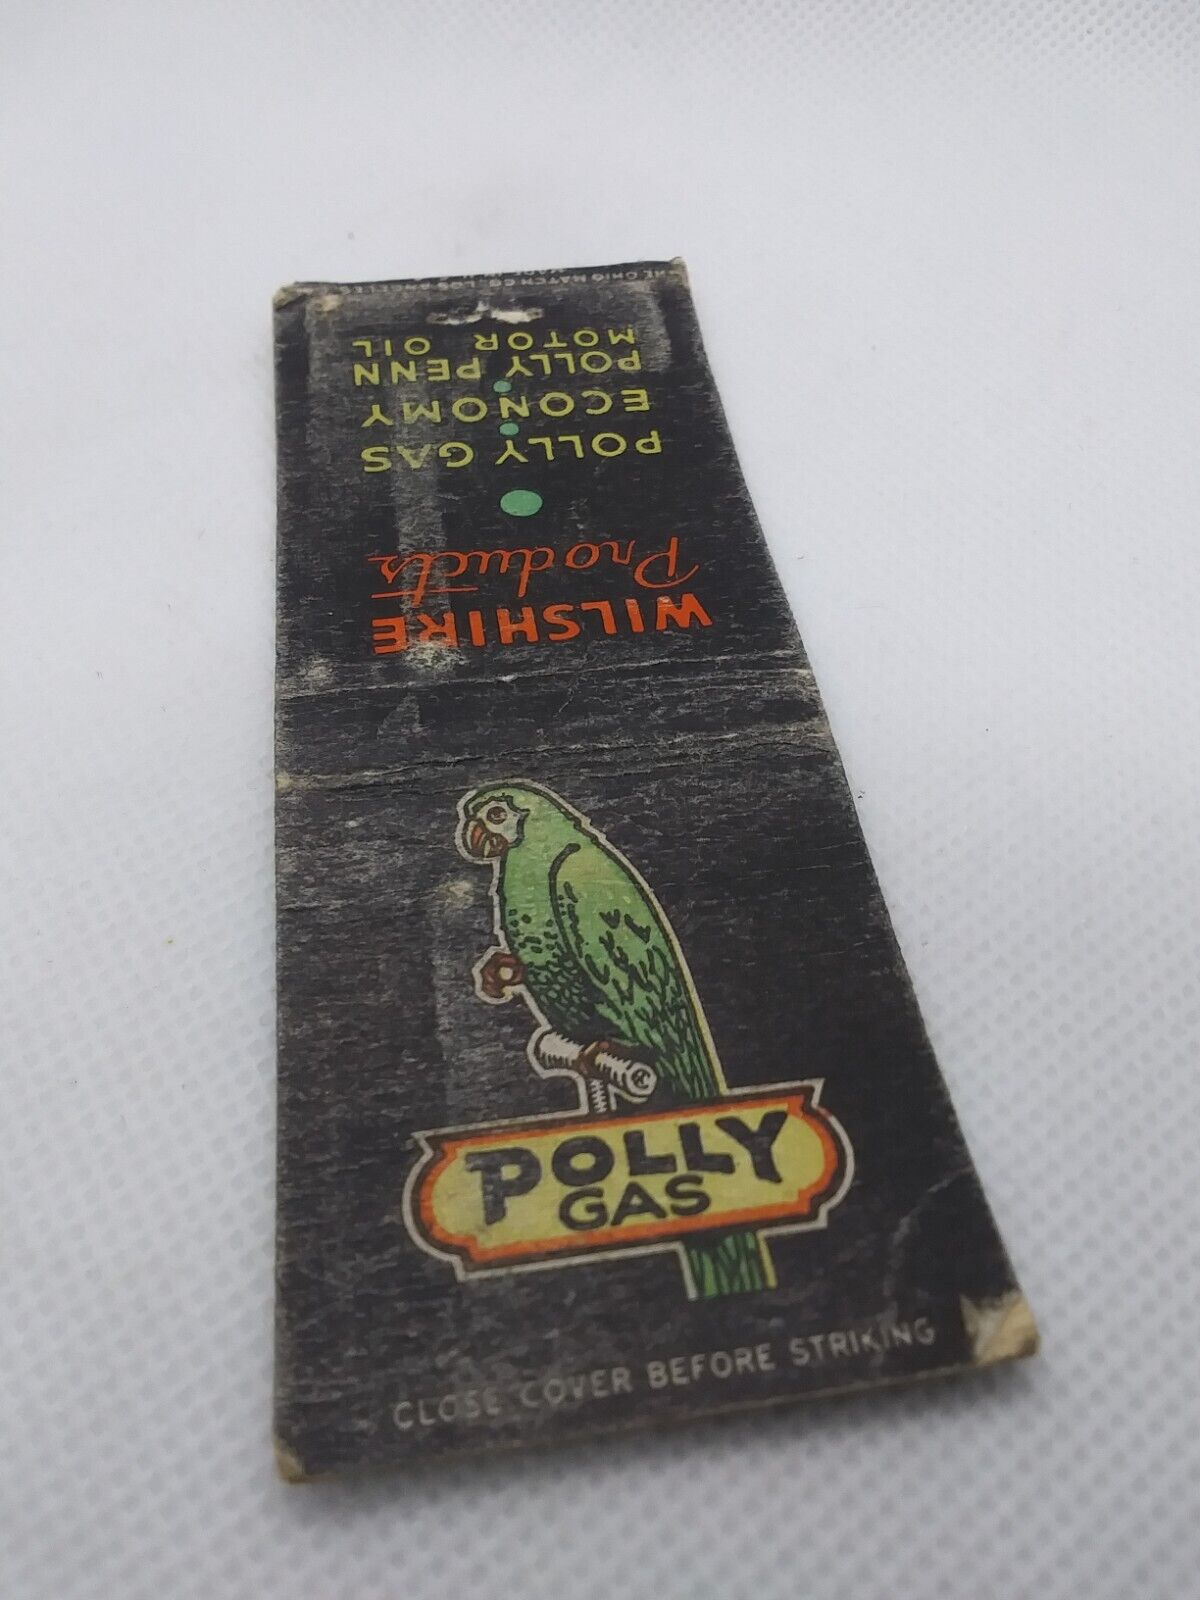 Vintage Polly Gas & Polly Penn Motor Oil Wilshire Products Matchbook